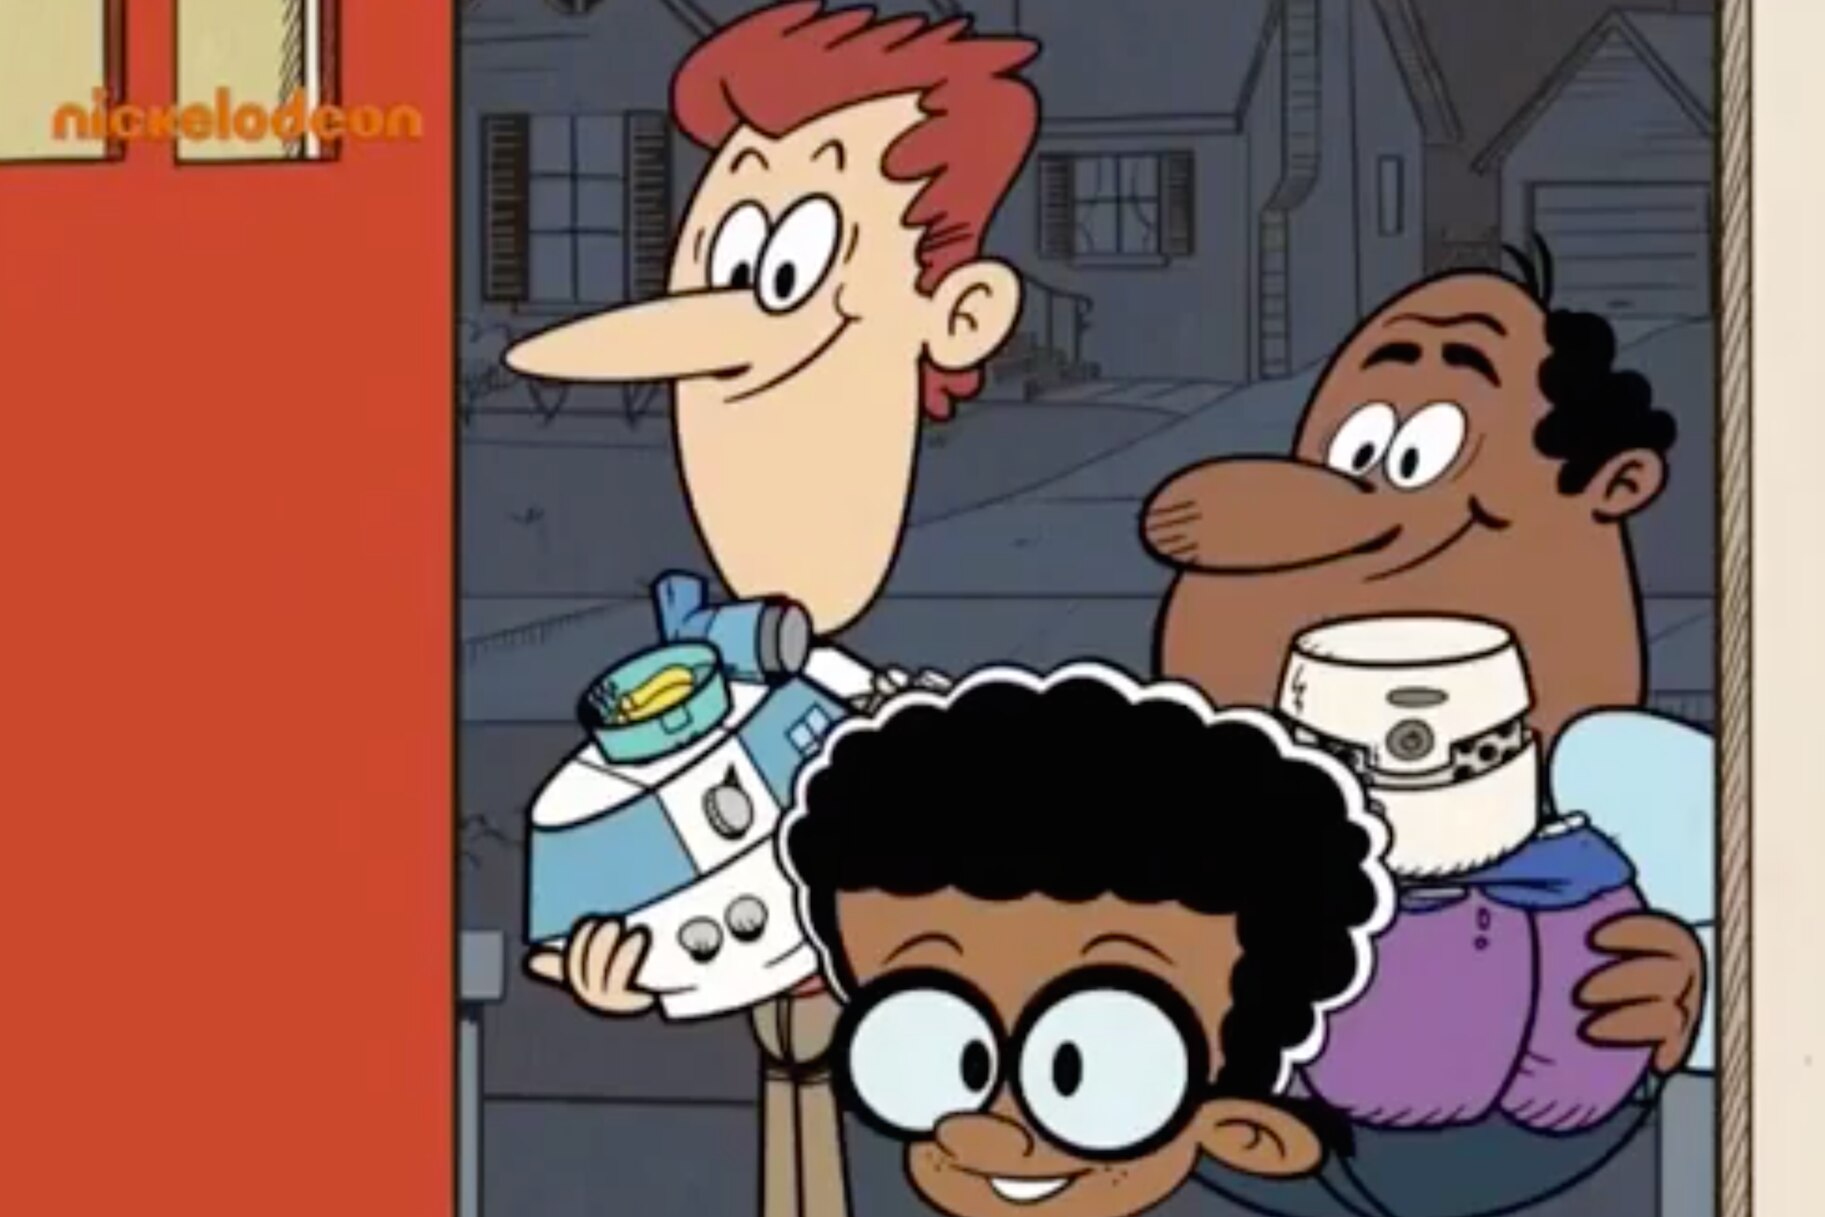 A New Nickelodeon Cartoon Features Married Gay Interracial Dads Very Real